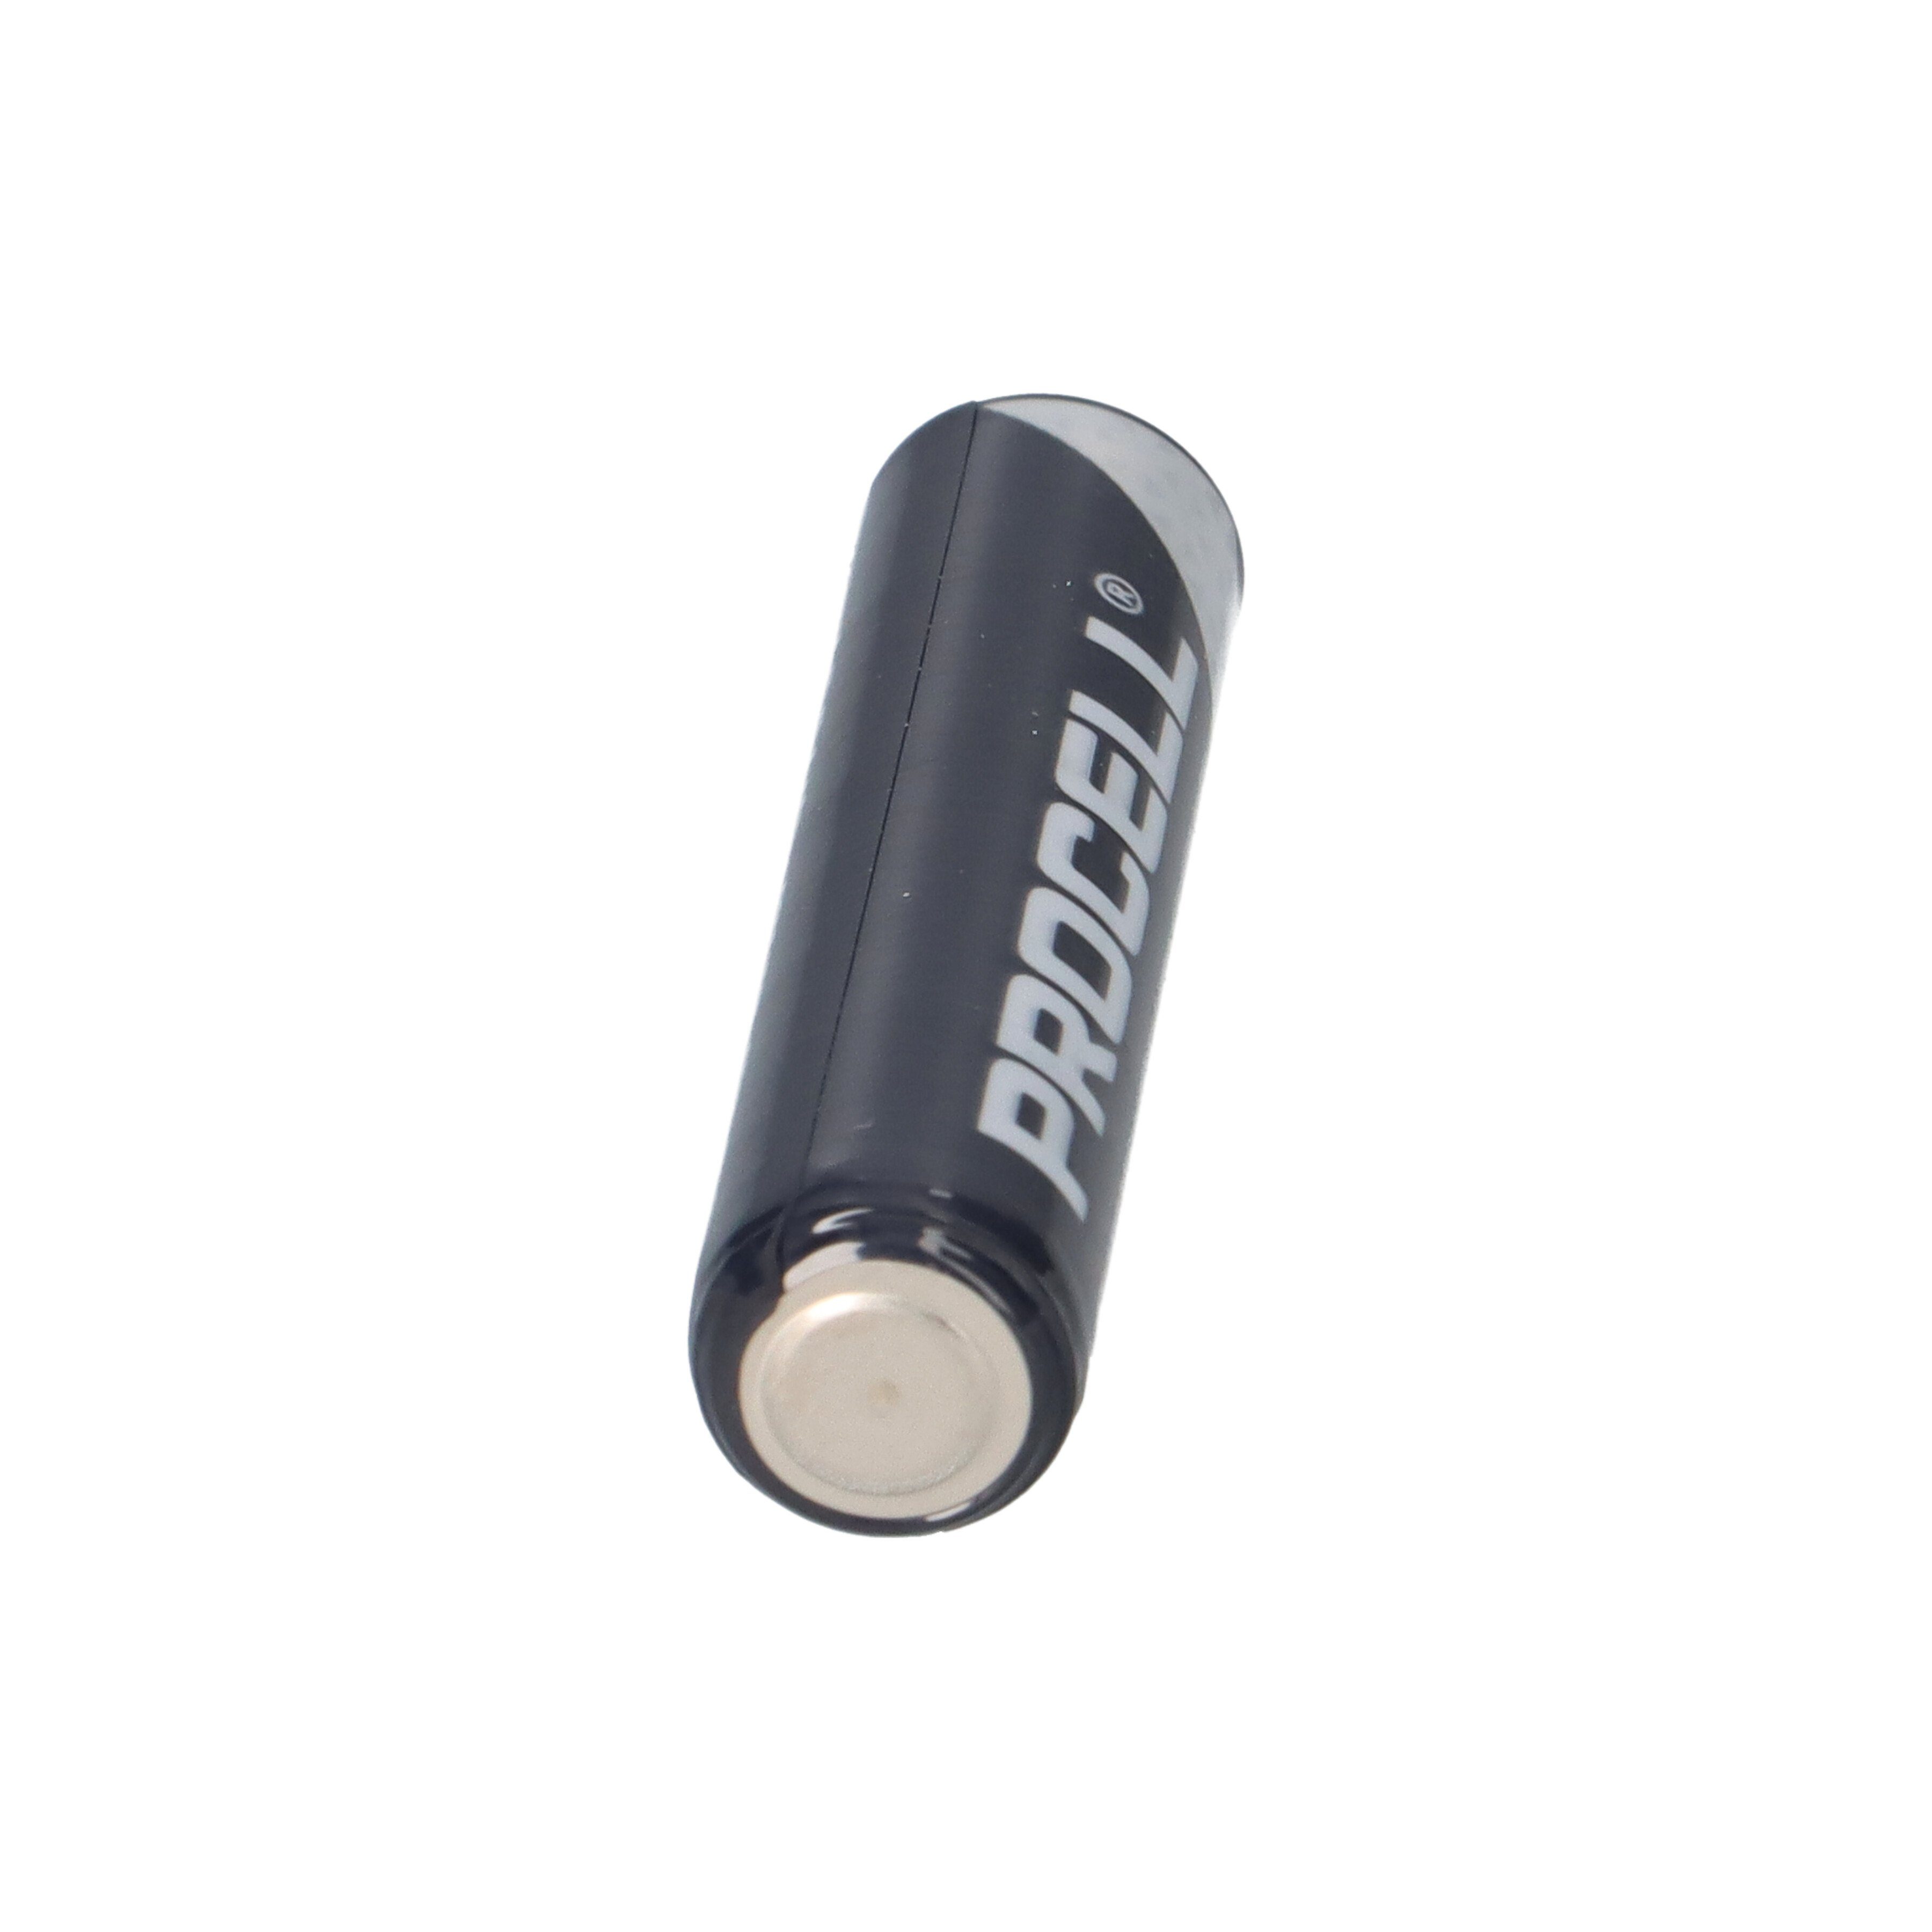 AAA Batterie Duracell Procell Micro 50x Batterie MN2400